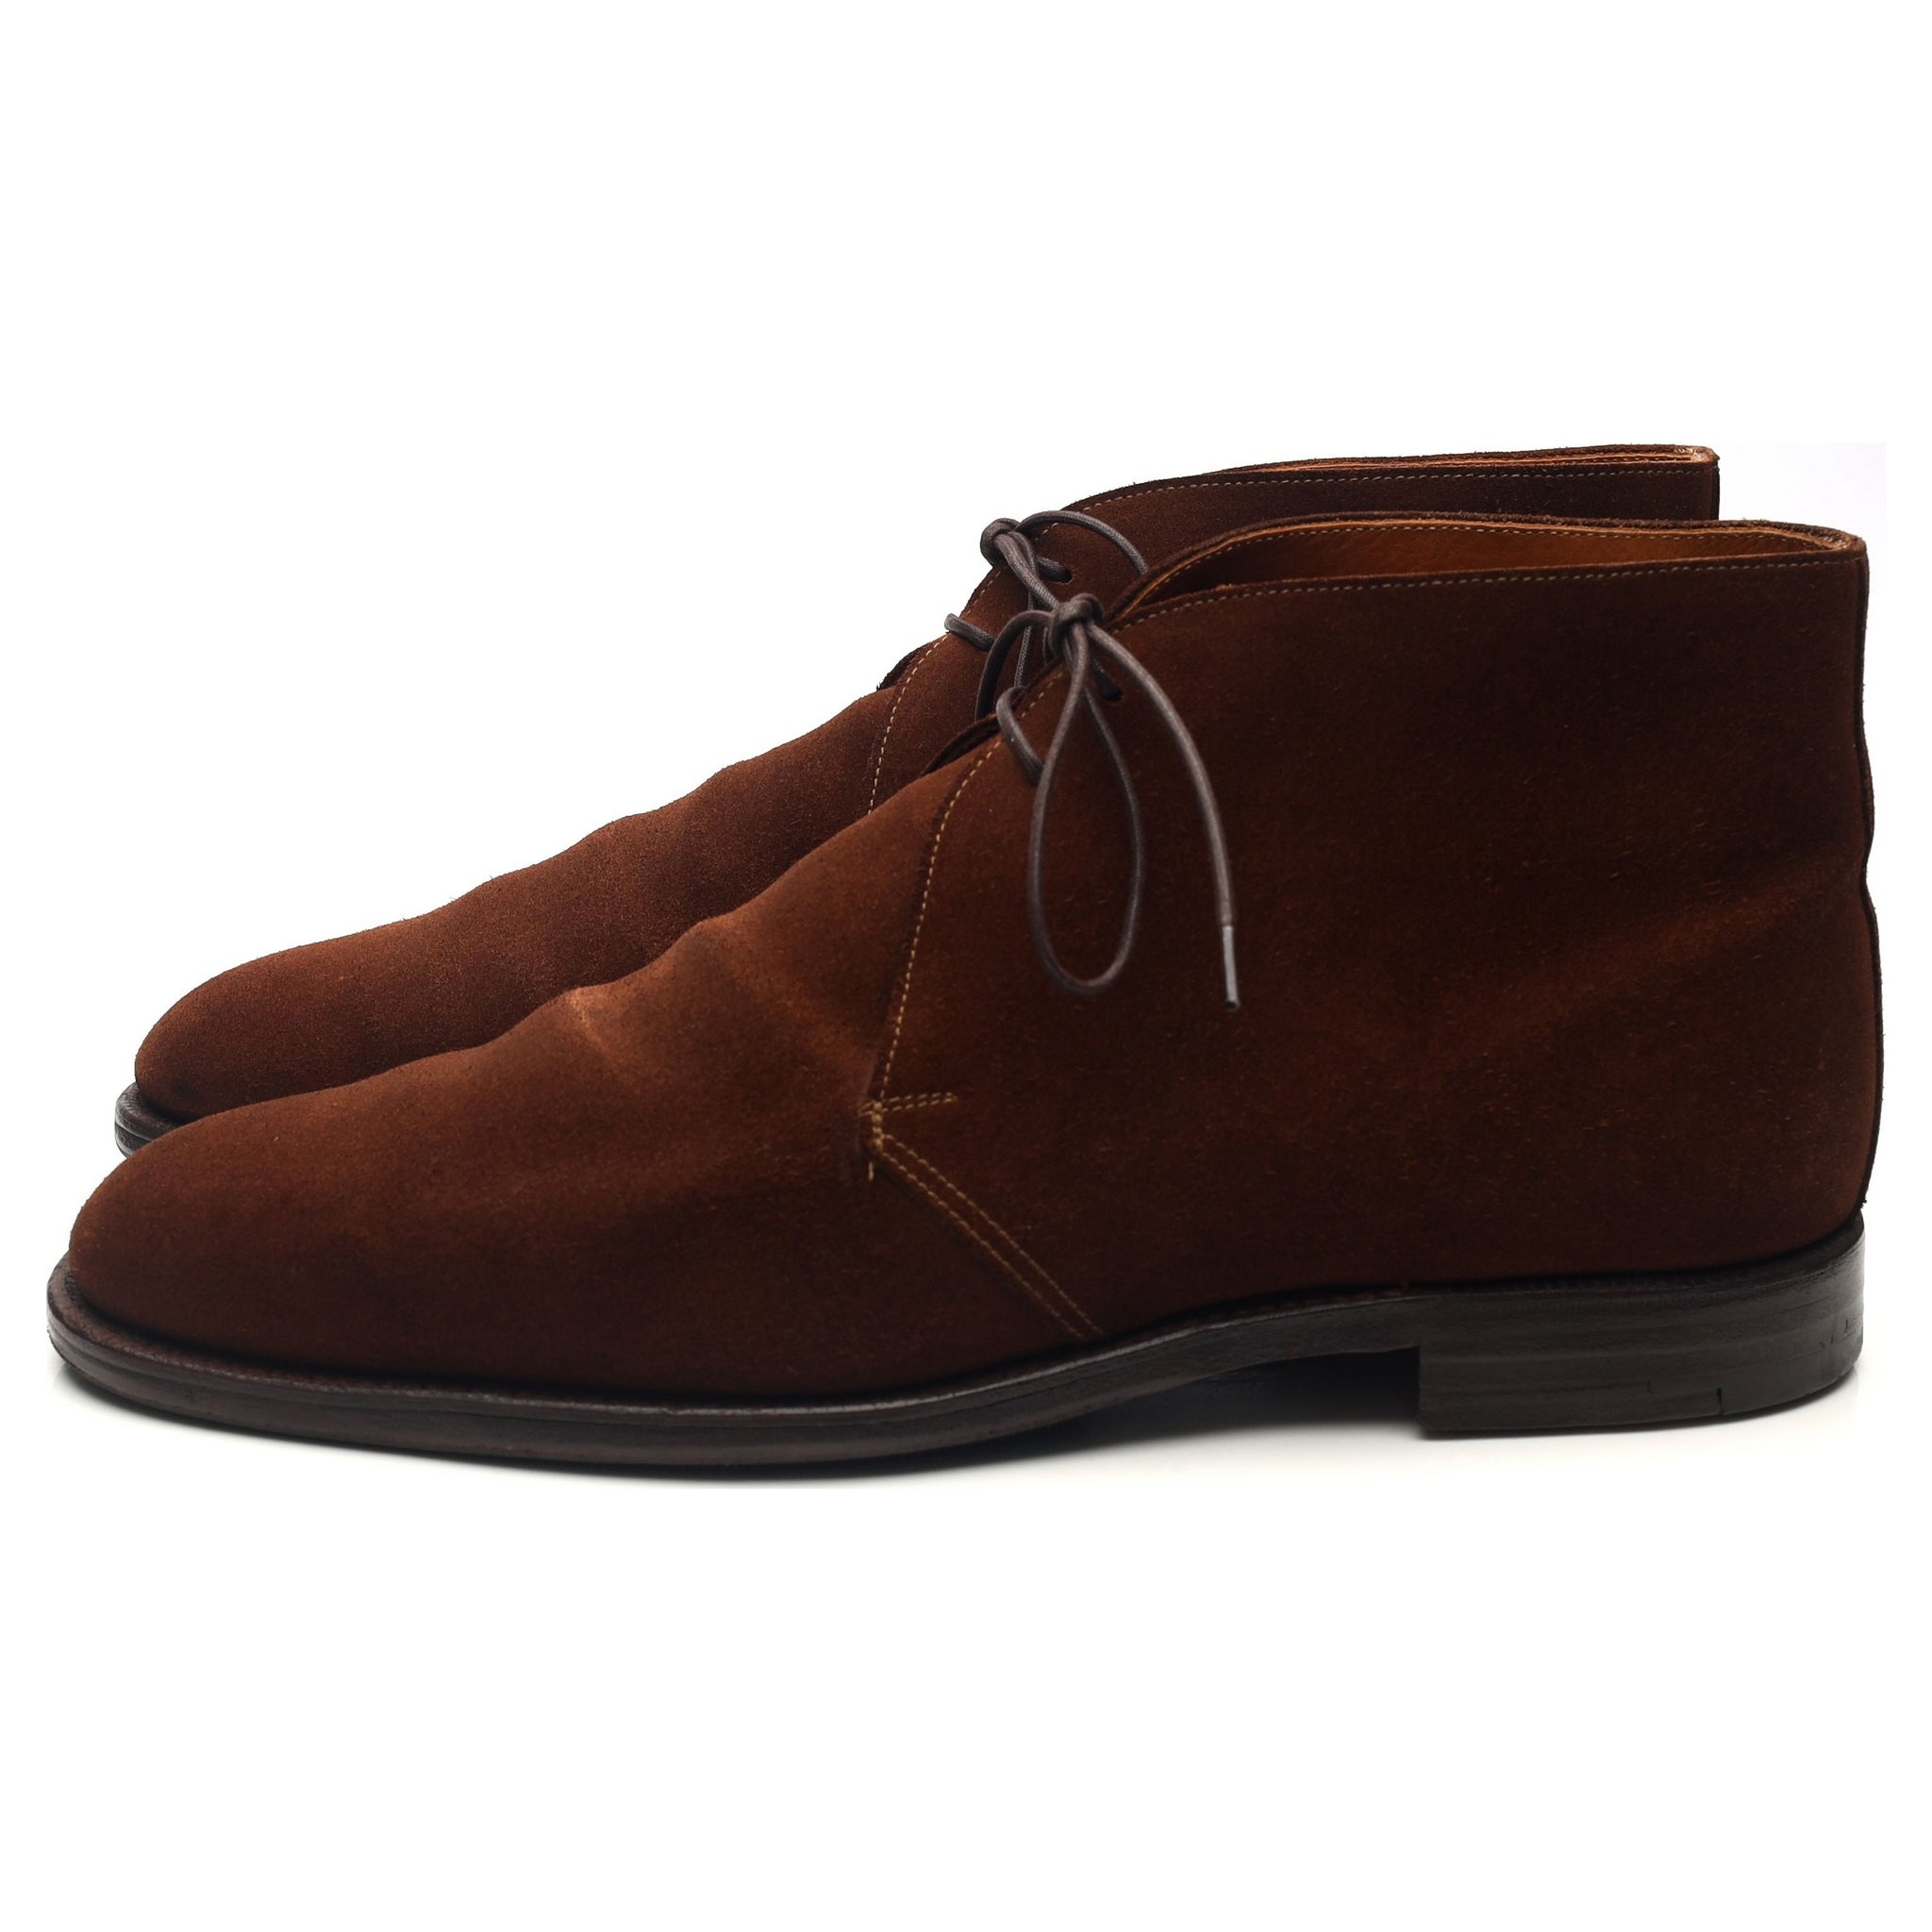 Chertsey' Brown Suede Chukka Boots UK 10.5 E - Abbot's Shoes